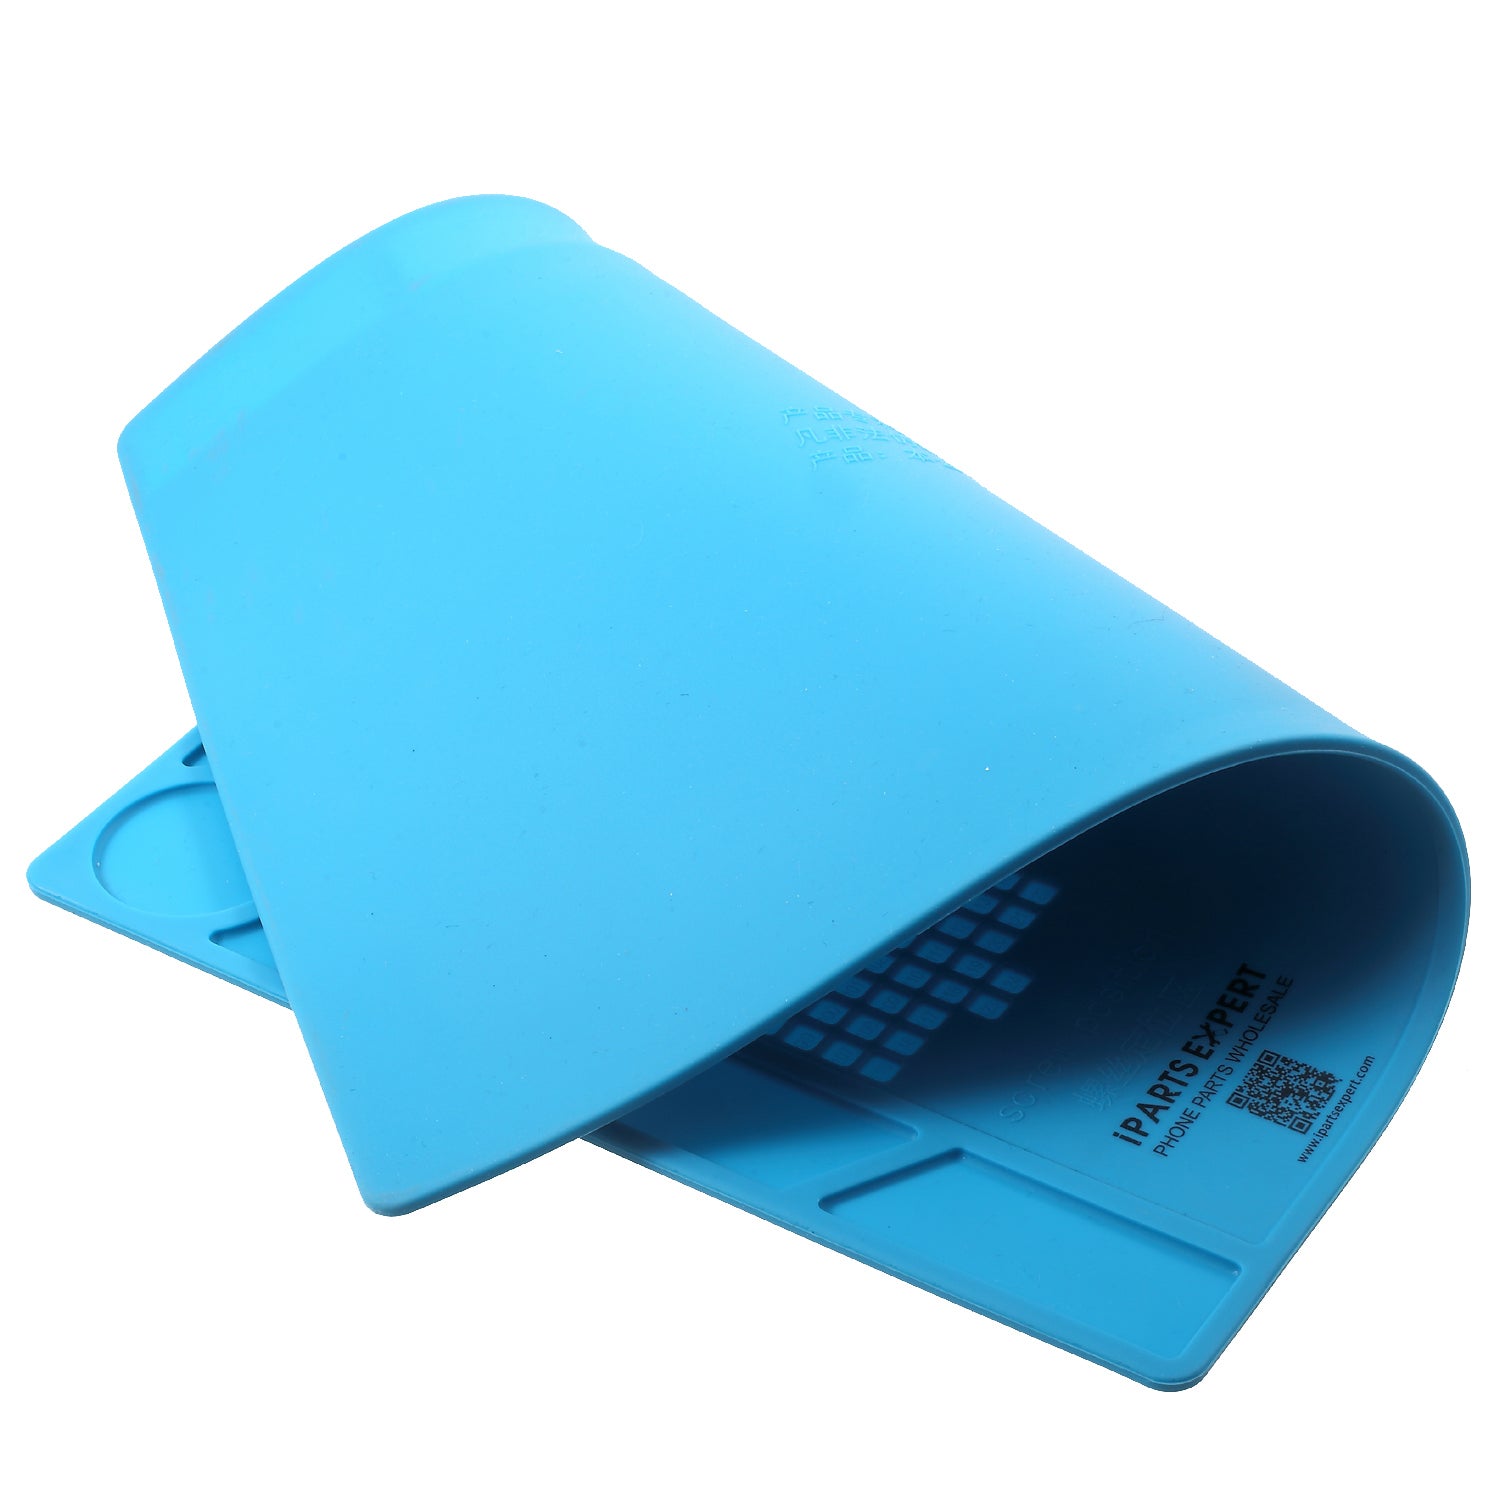 IPARTSEXPERT Heat Insulation Silicone Maintenance Pad for Mobile Phone, Size: 35cm x 25cm x 0.3cm